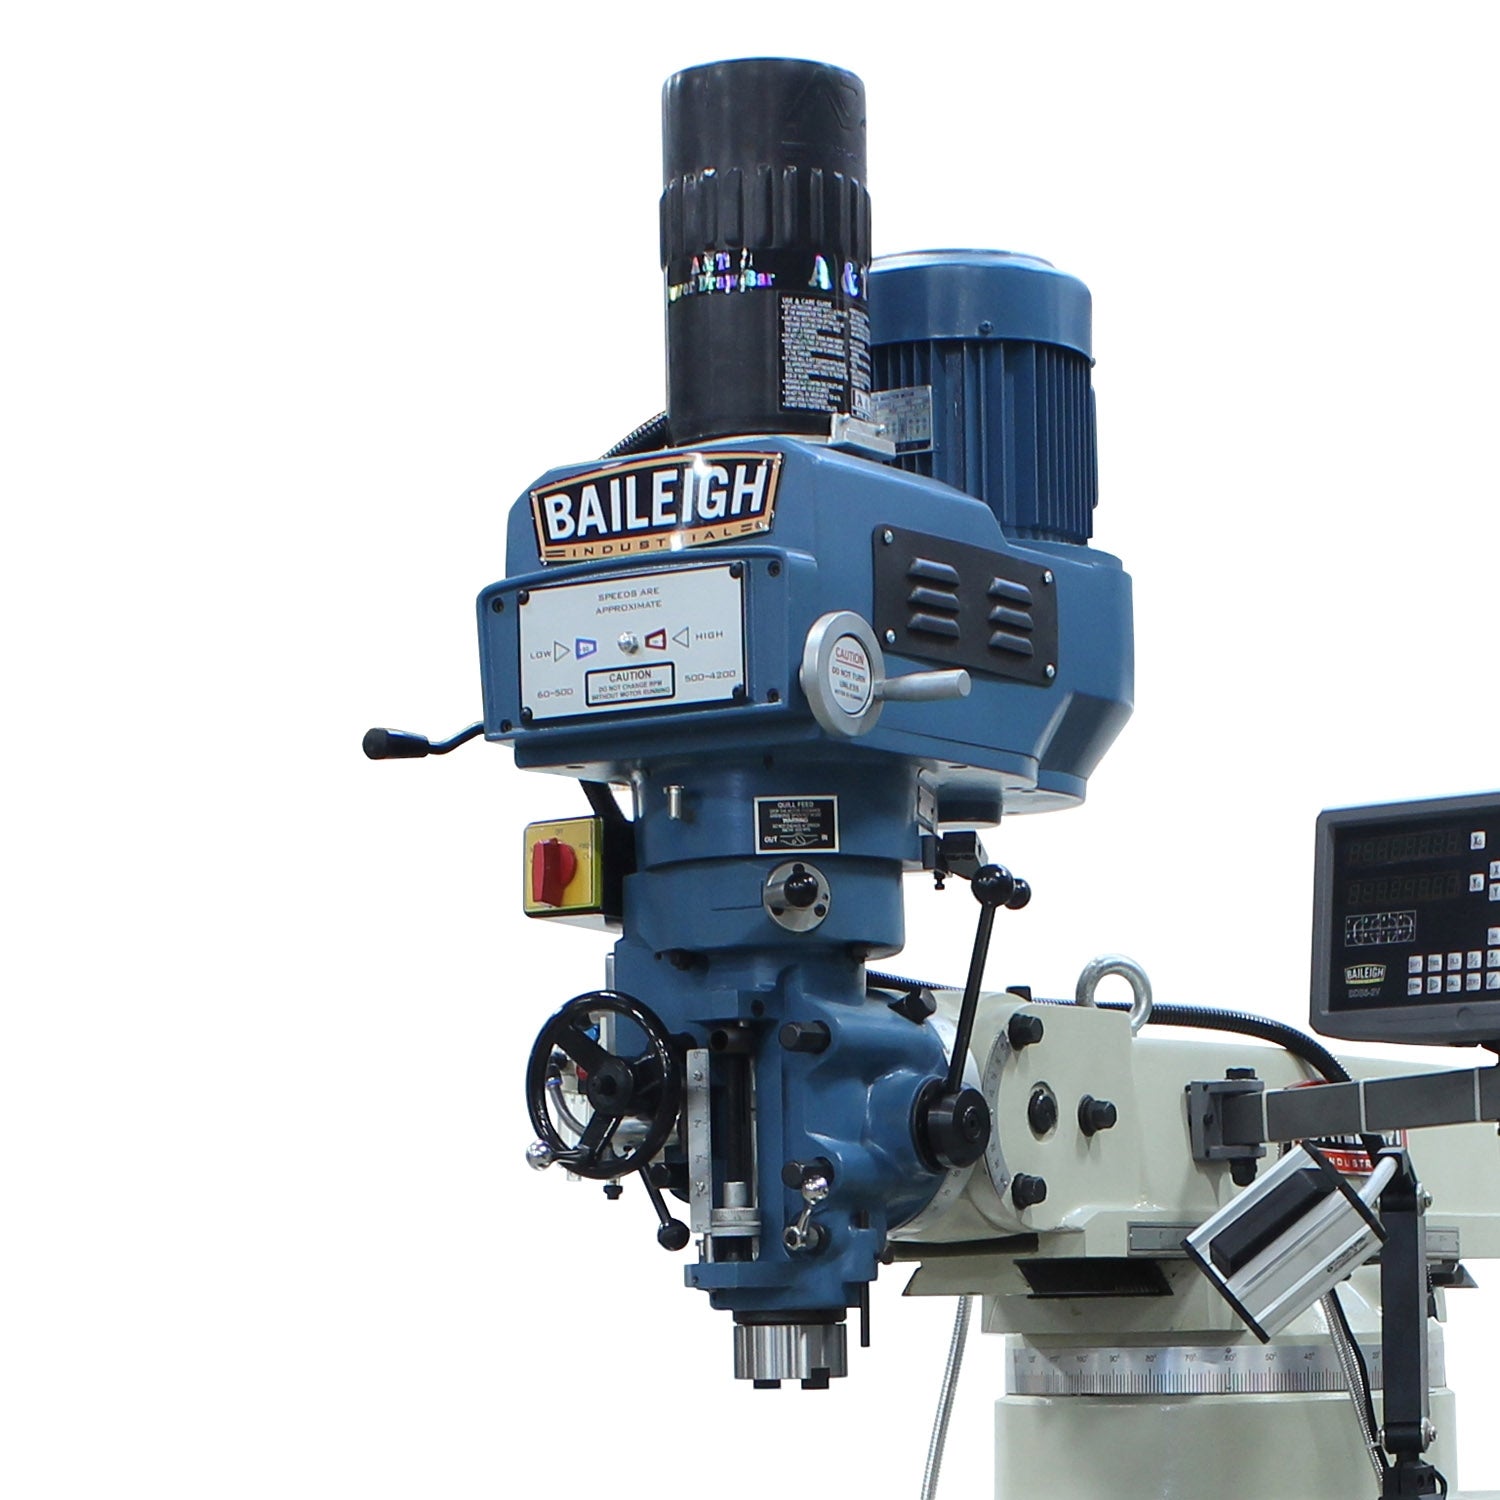 Baileigh VM-1054E-VS 220V 3 Phase Vertical Mill, 10" x 54" Table, Variable Speed, NT40 Spindle, Coolant, Power Feeds, DRO